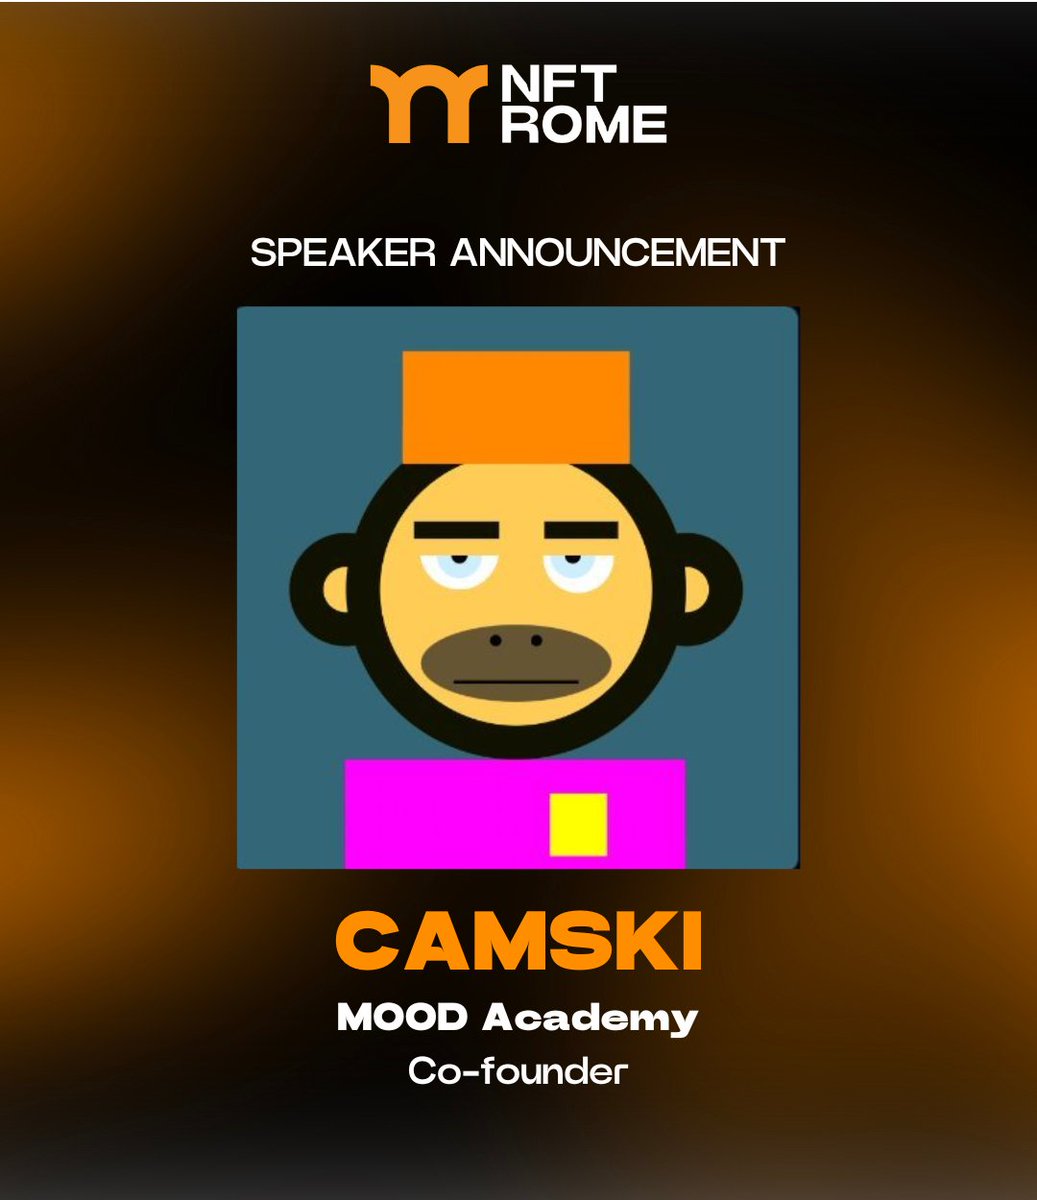 Speaker Announcement @camskiiii, Co-Founder at MOOD Academy, will be speaking at NFT Rome.